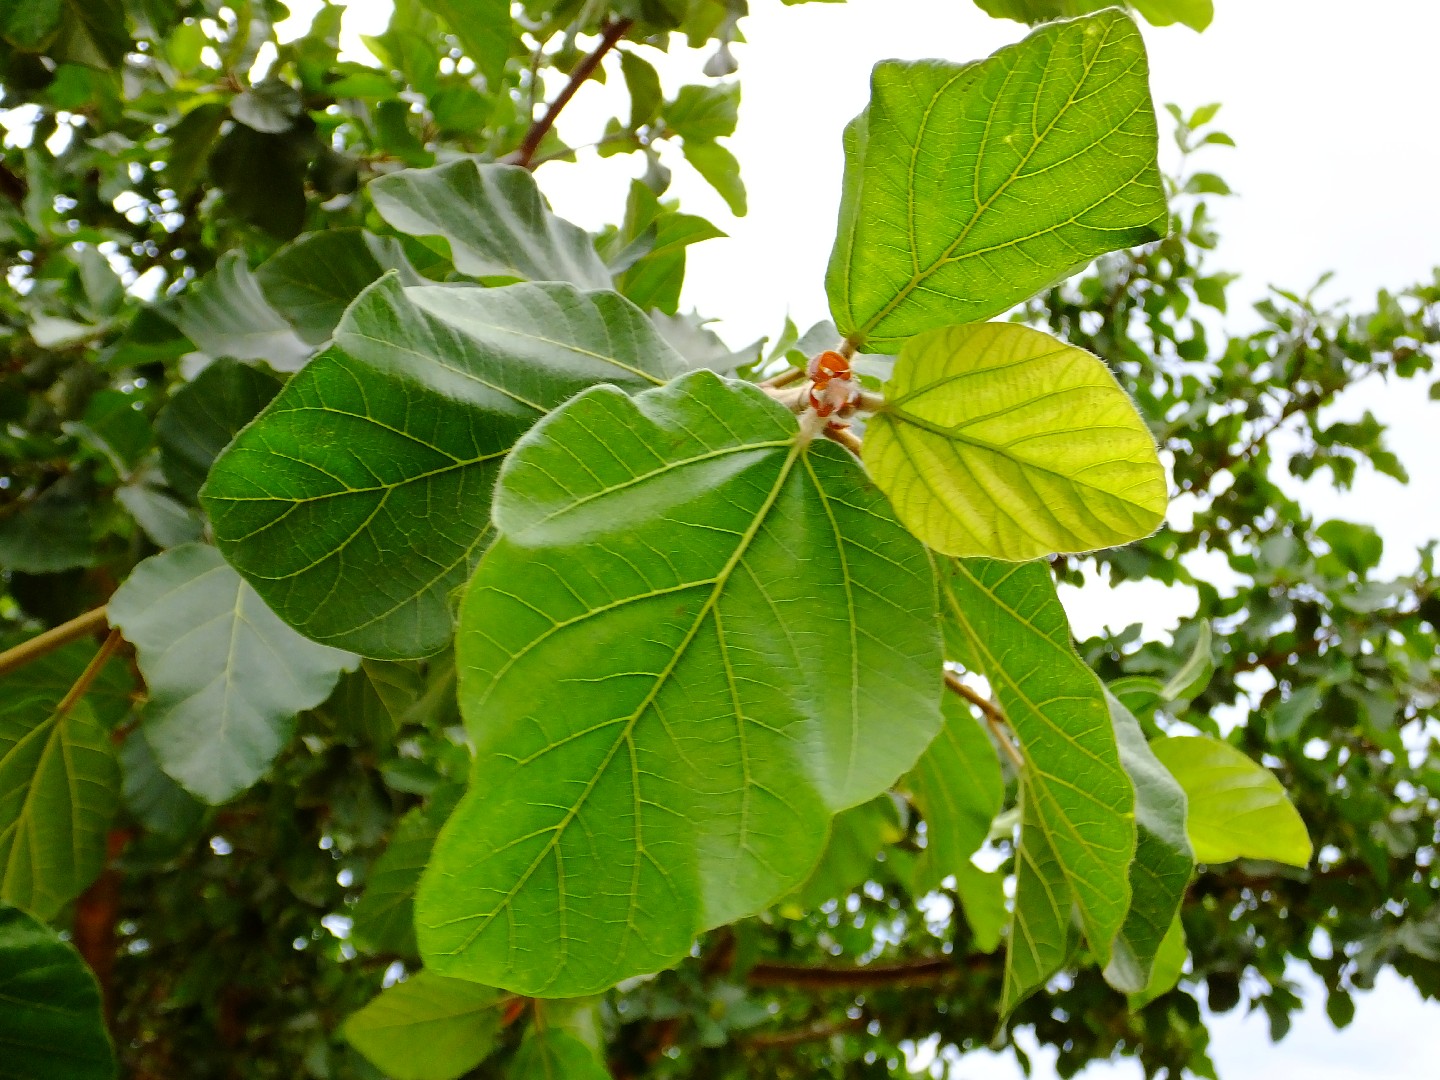 Montgomery Ooze fantom Sycamore fig (Ficus sycomorus) Flower, Leaf, Care, Uses - PictureThis